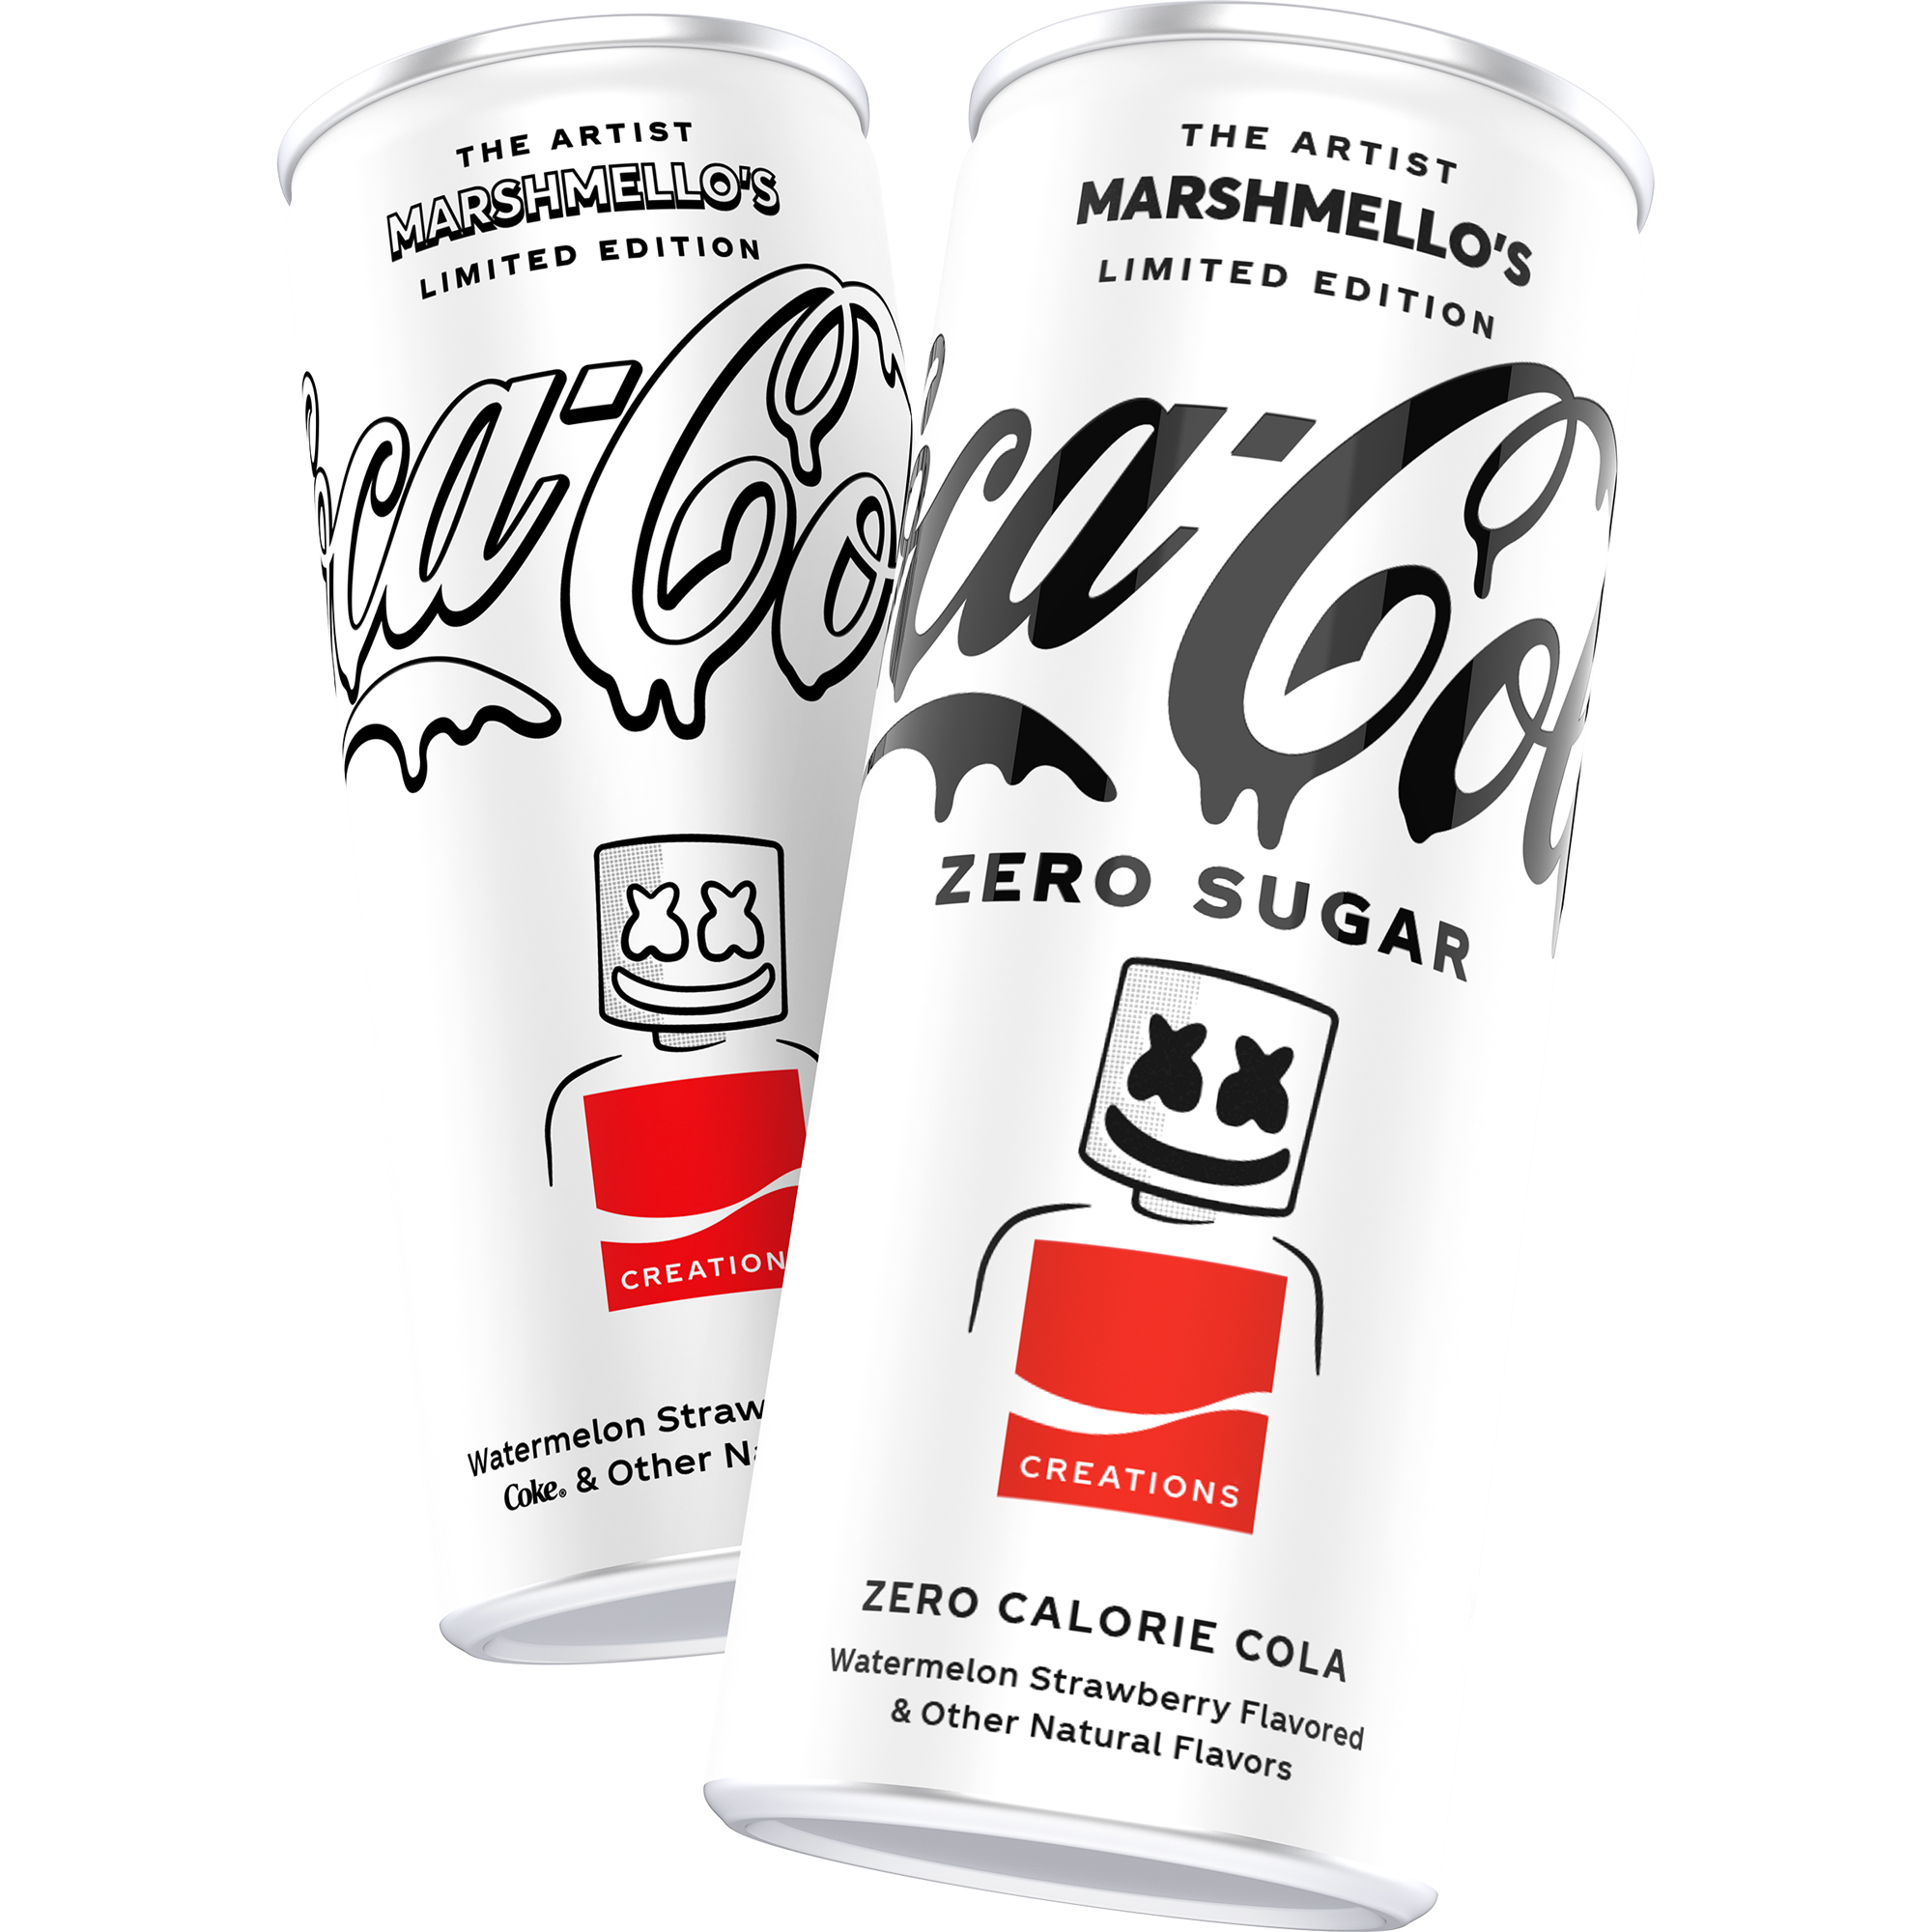 Marshmello Coca-Cola Flavor: What Does It Taste Like? | FN Dish